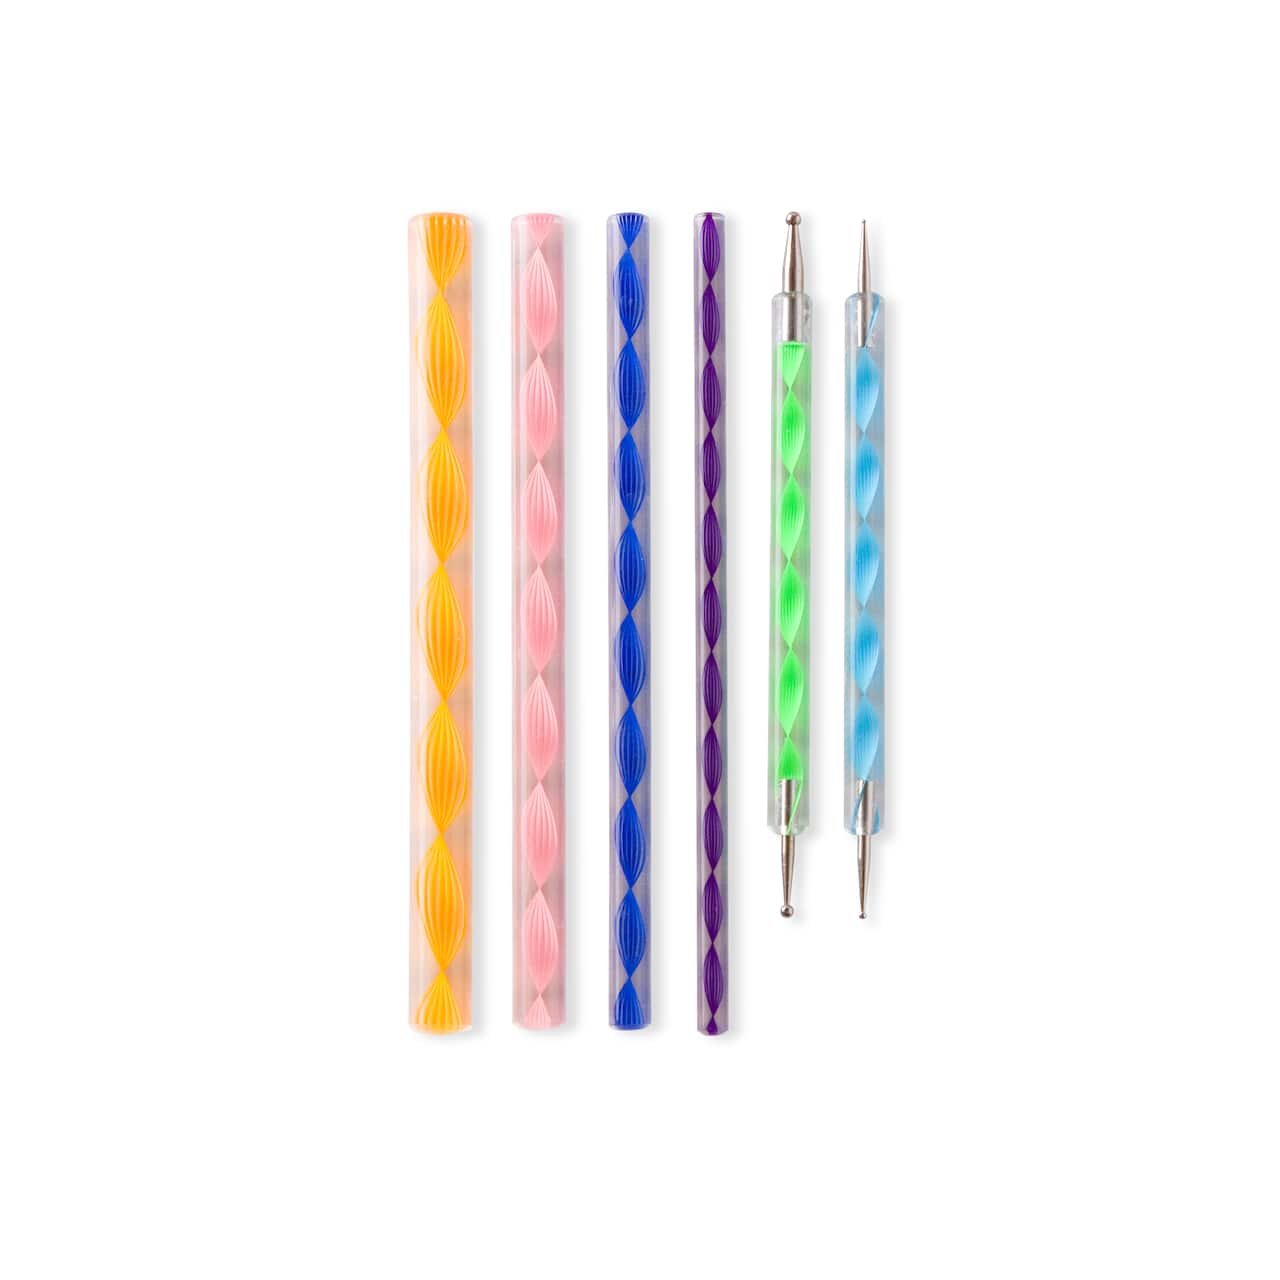 Mandala Dotting Tools with Colorful Handles by Craft Smart®, 6ct.